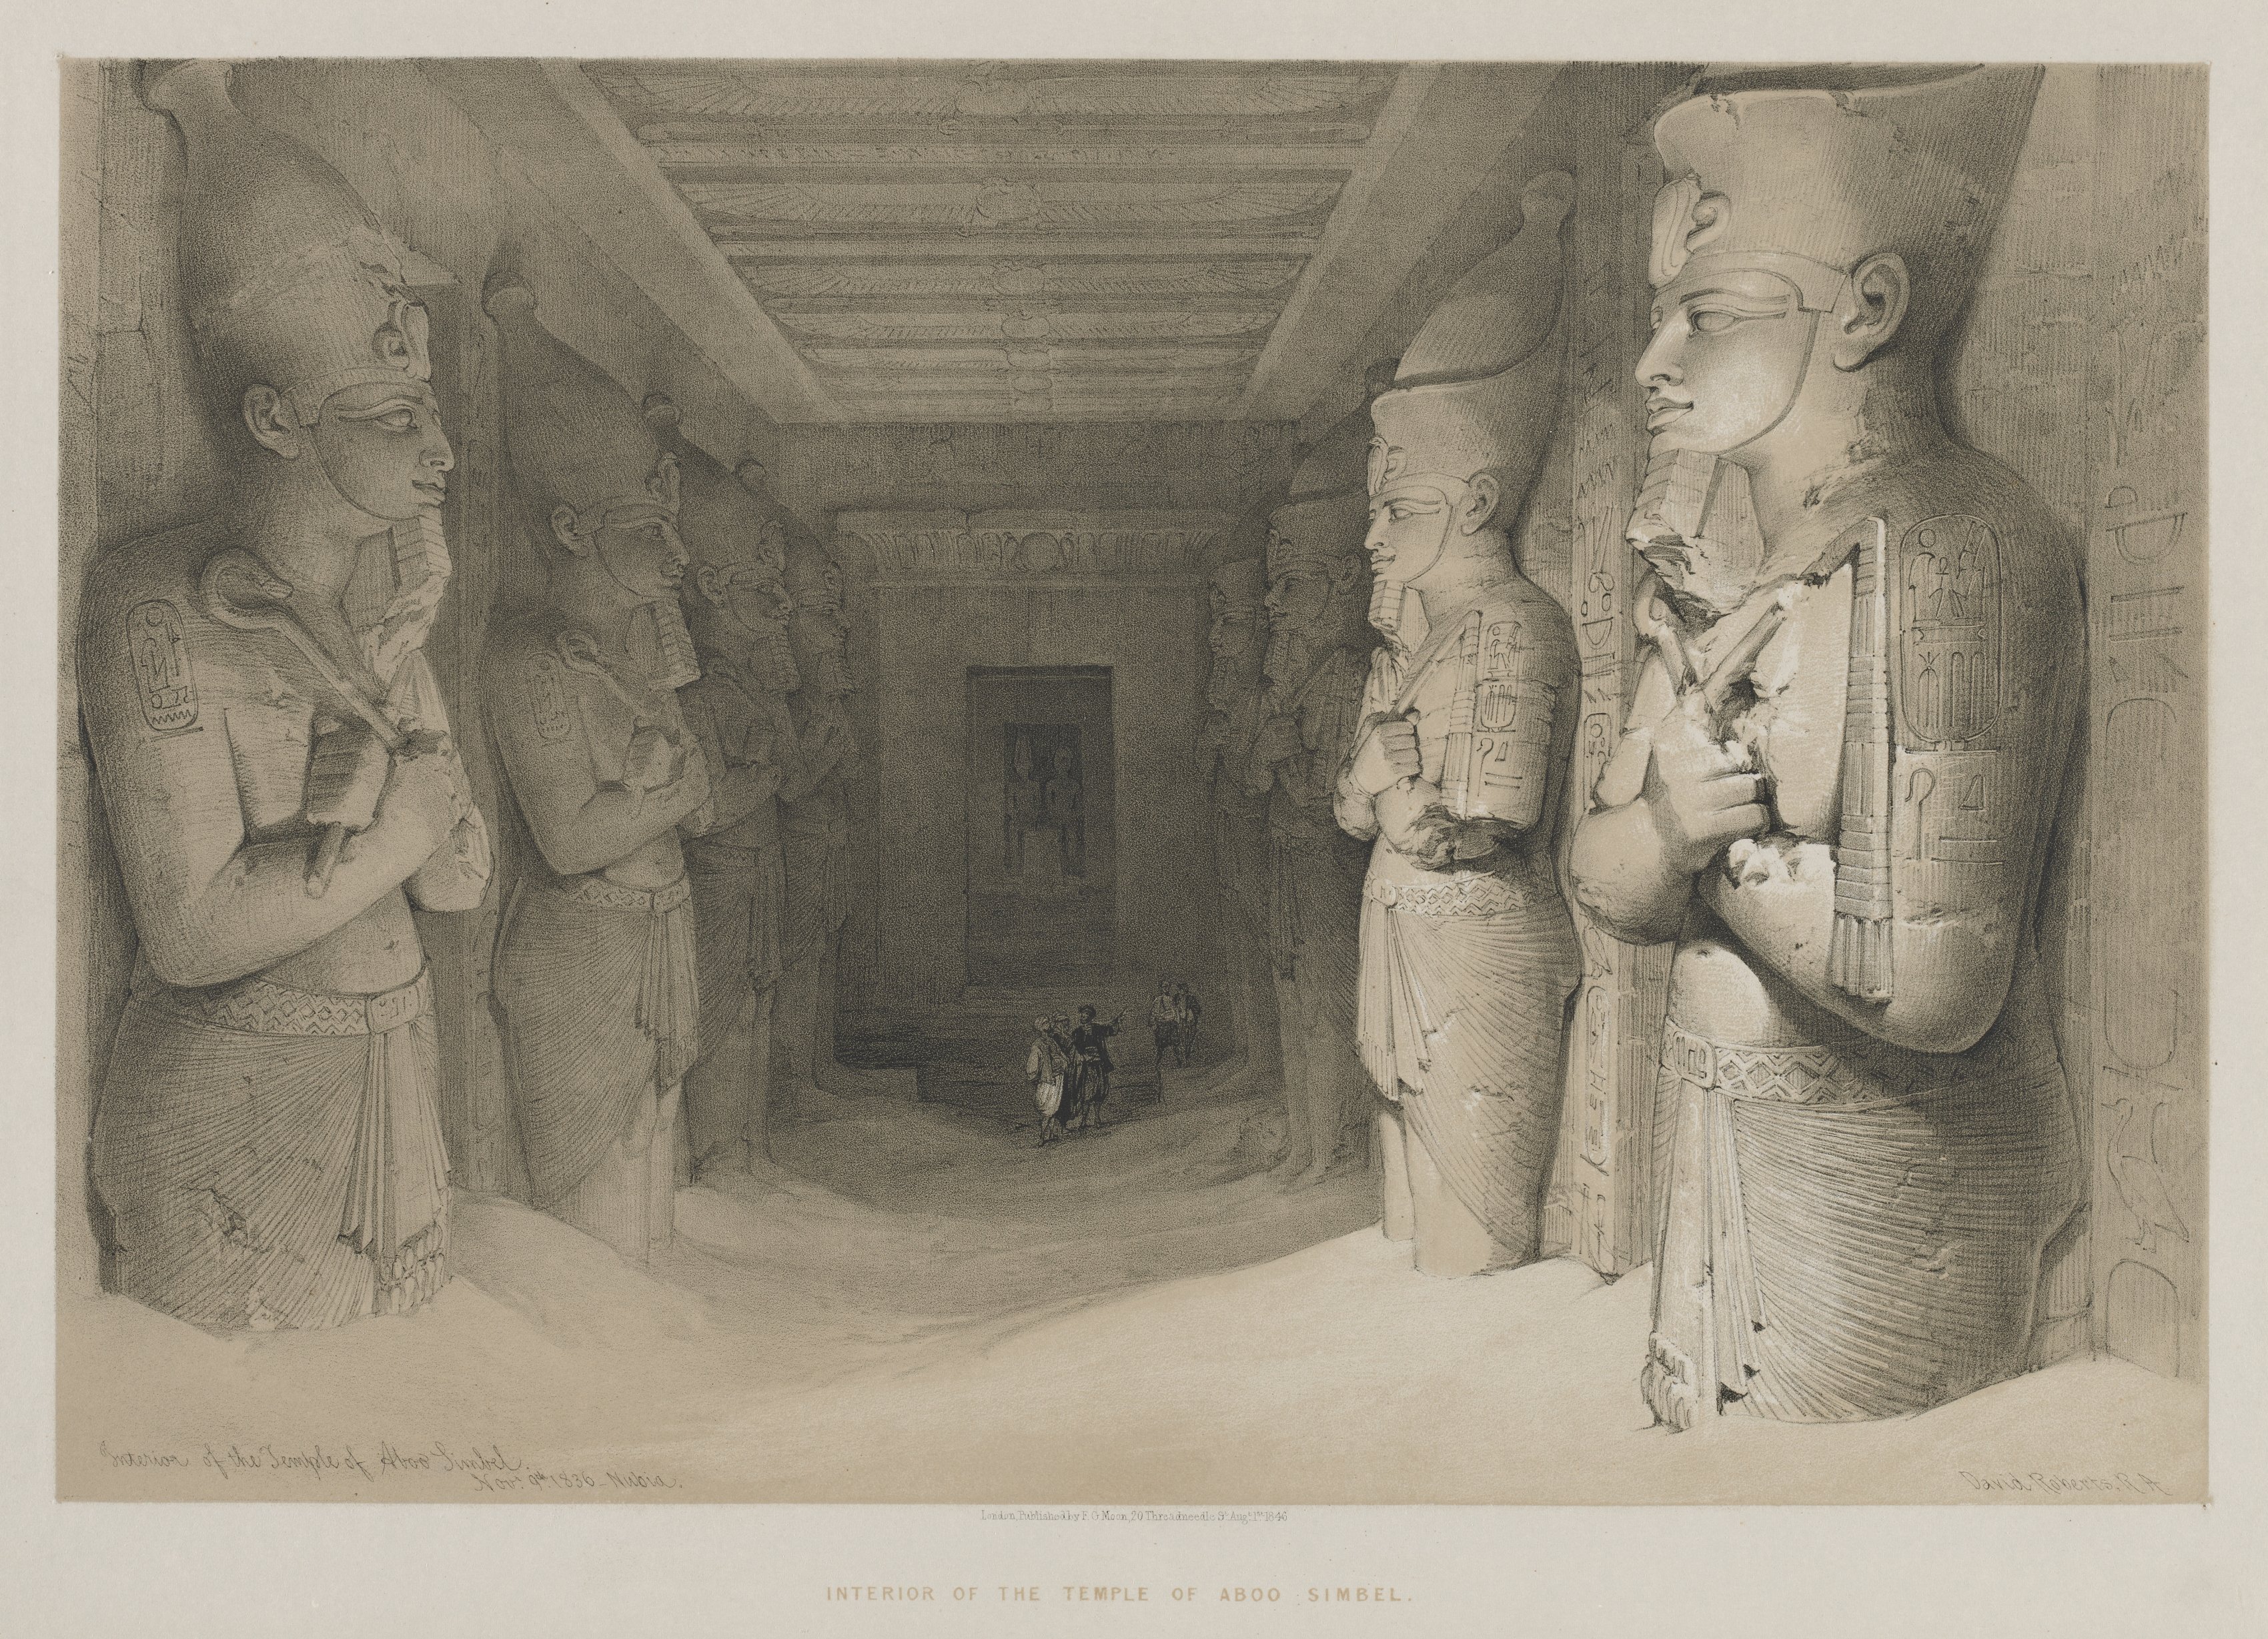 Egypt and Nubia, Volume I: Interior of the Temple of Aboo-Simbel